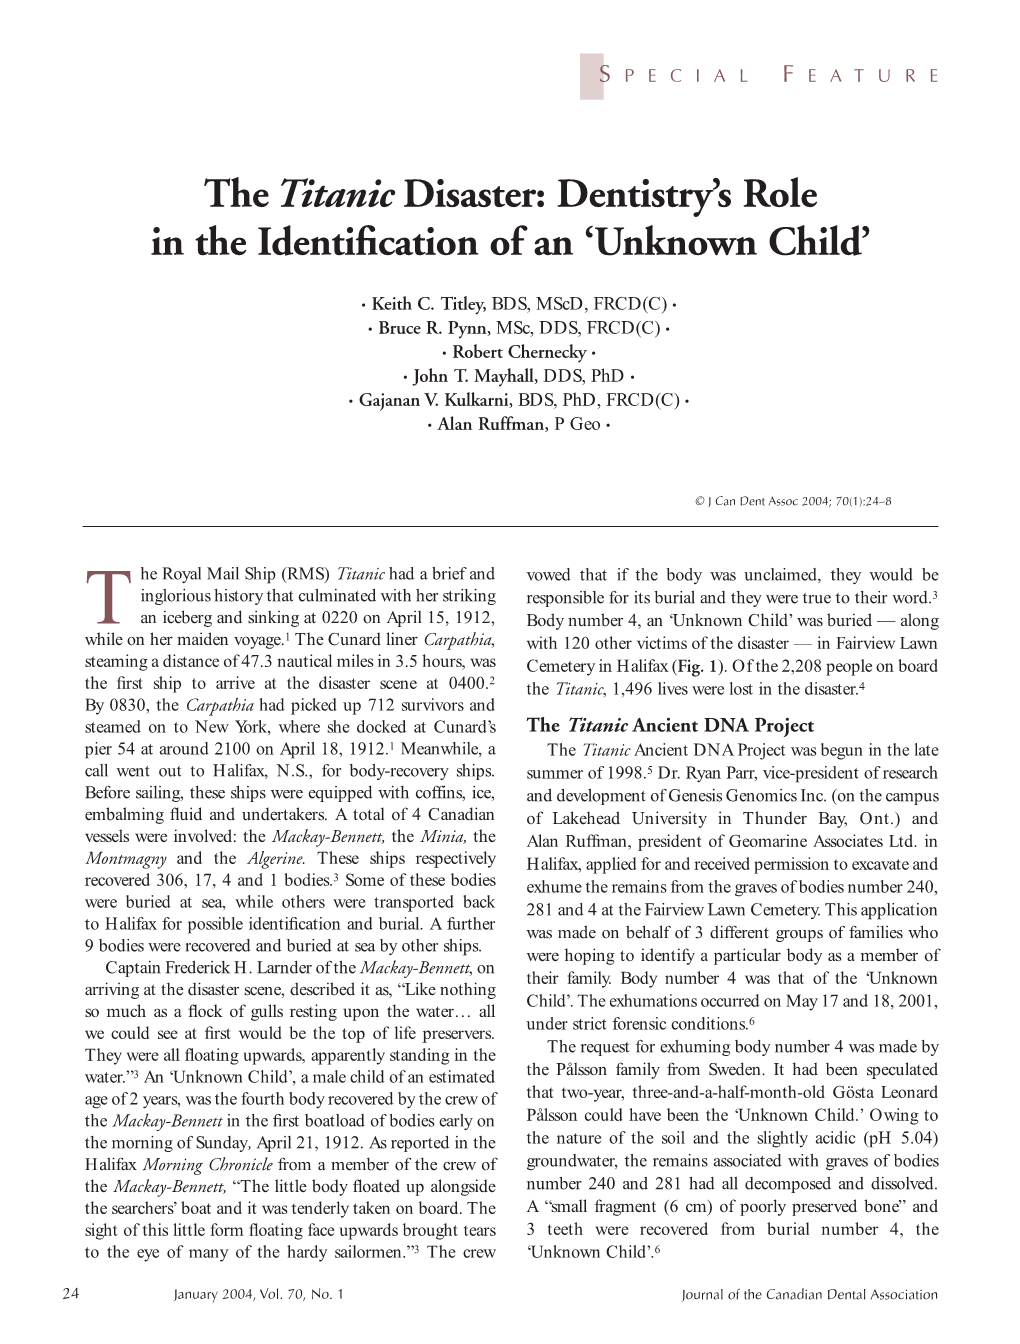 Thetitanic Disaster: Dentistry's Role in the Identification of an 'Unknown